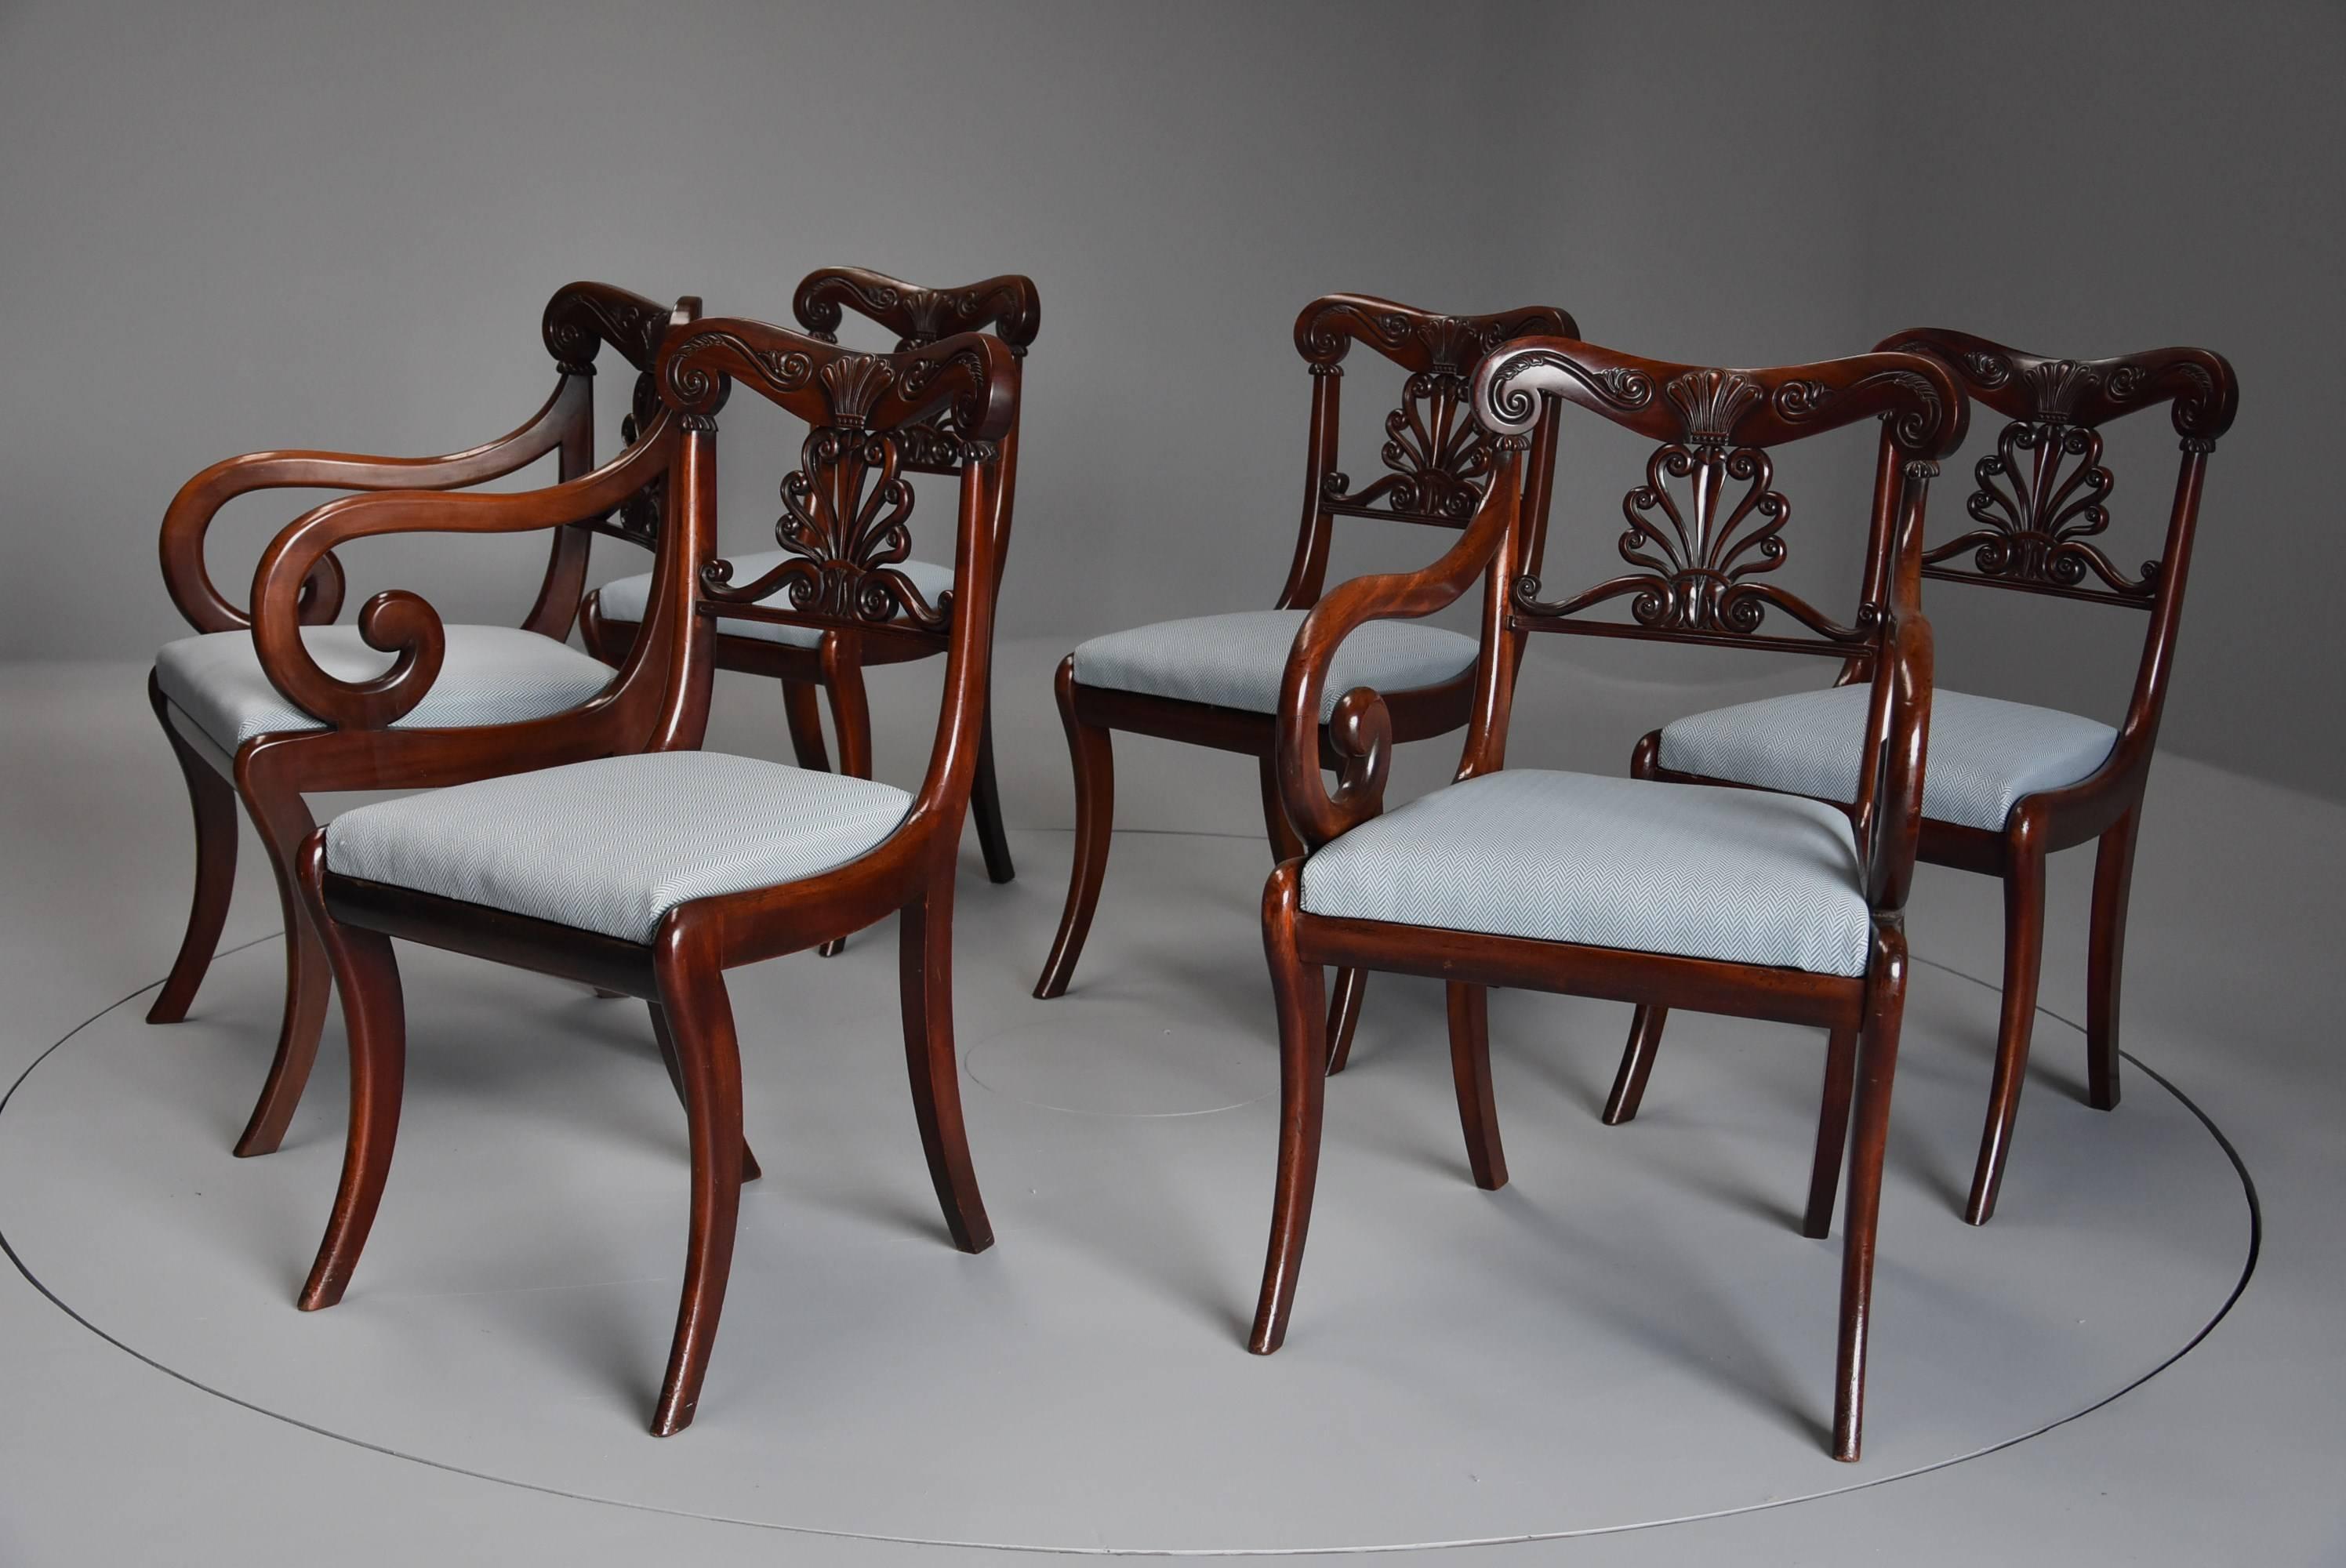 Early 19th Century Exceptional Set of 12 Superb Quality Cuban Mahogany Regency Dining Chairs